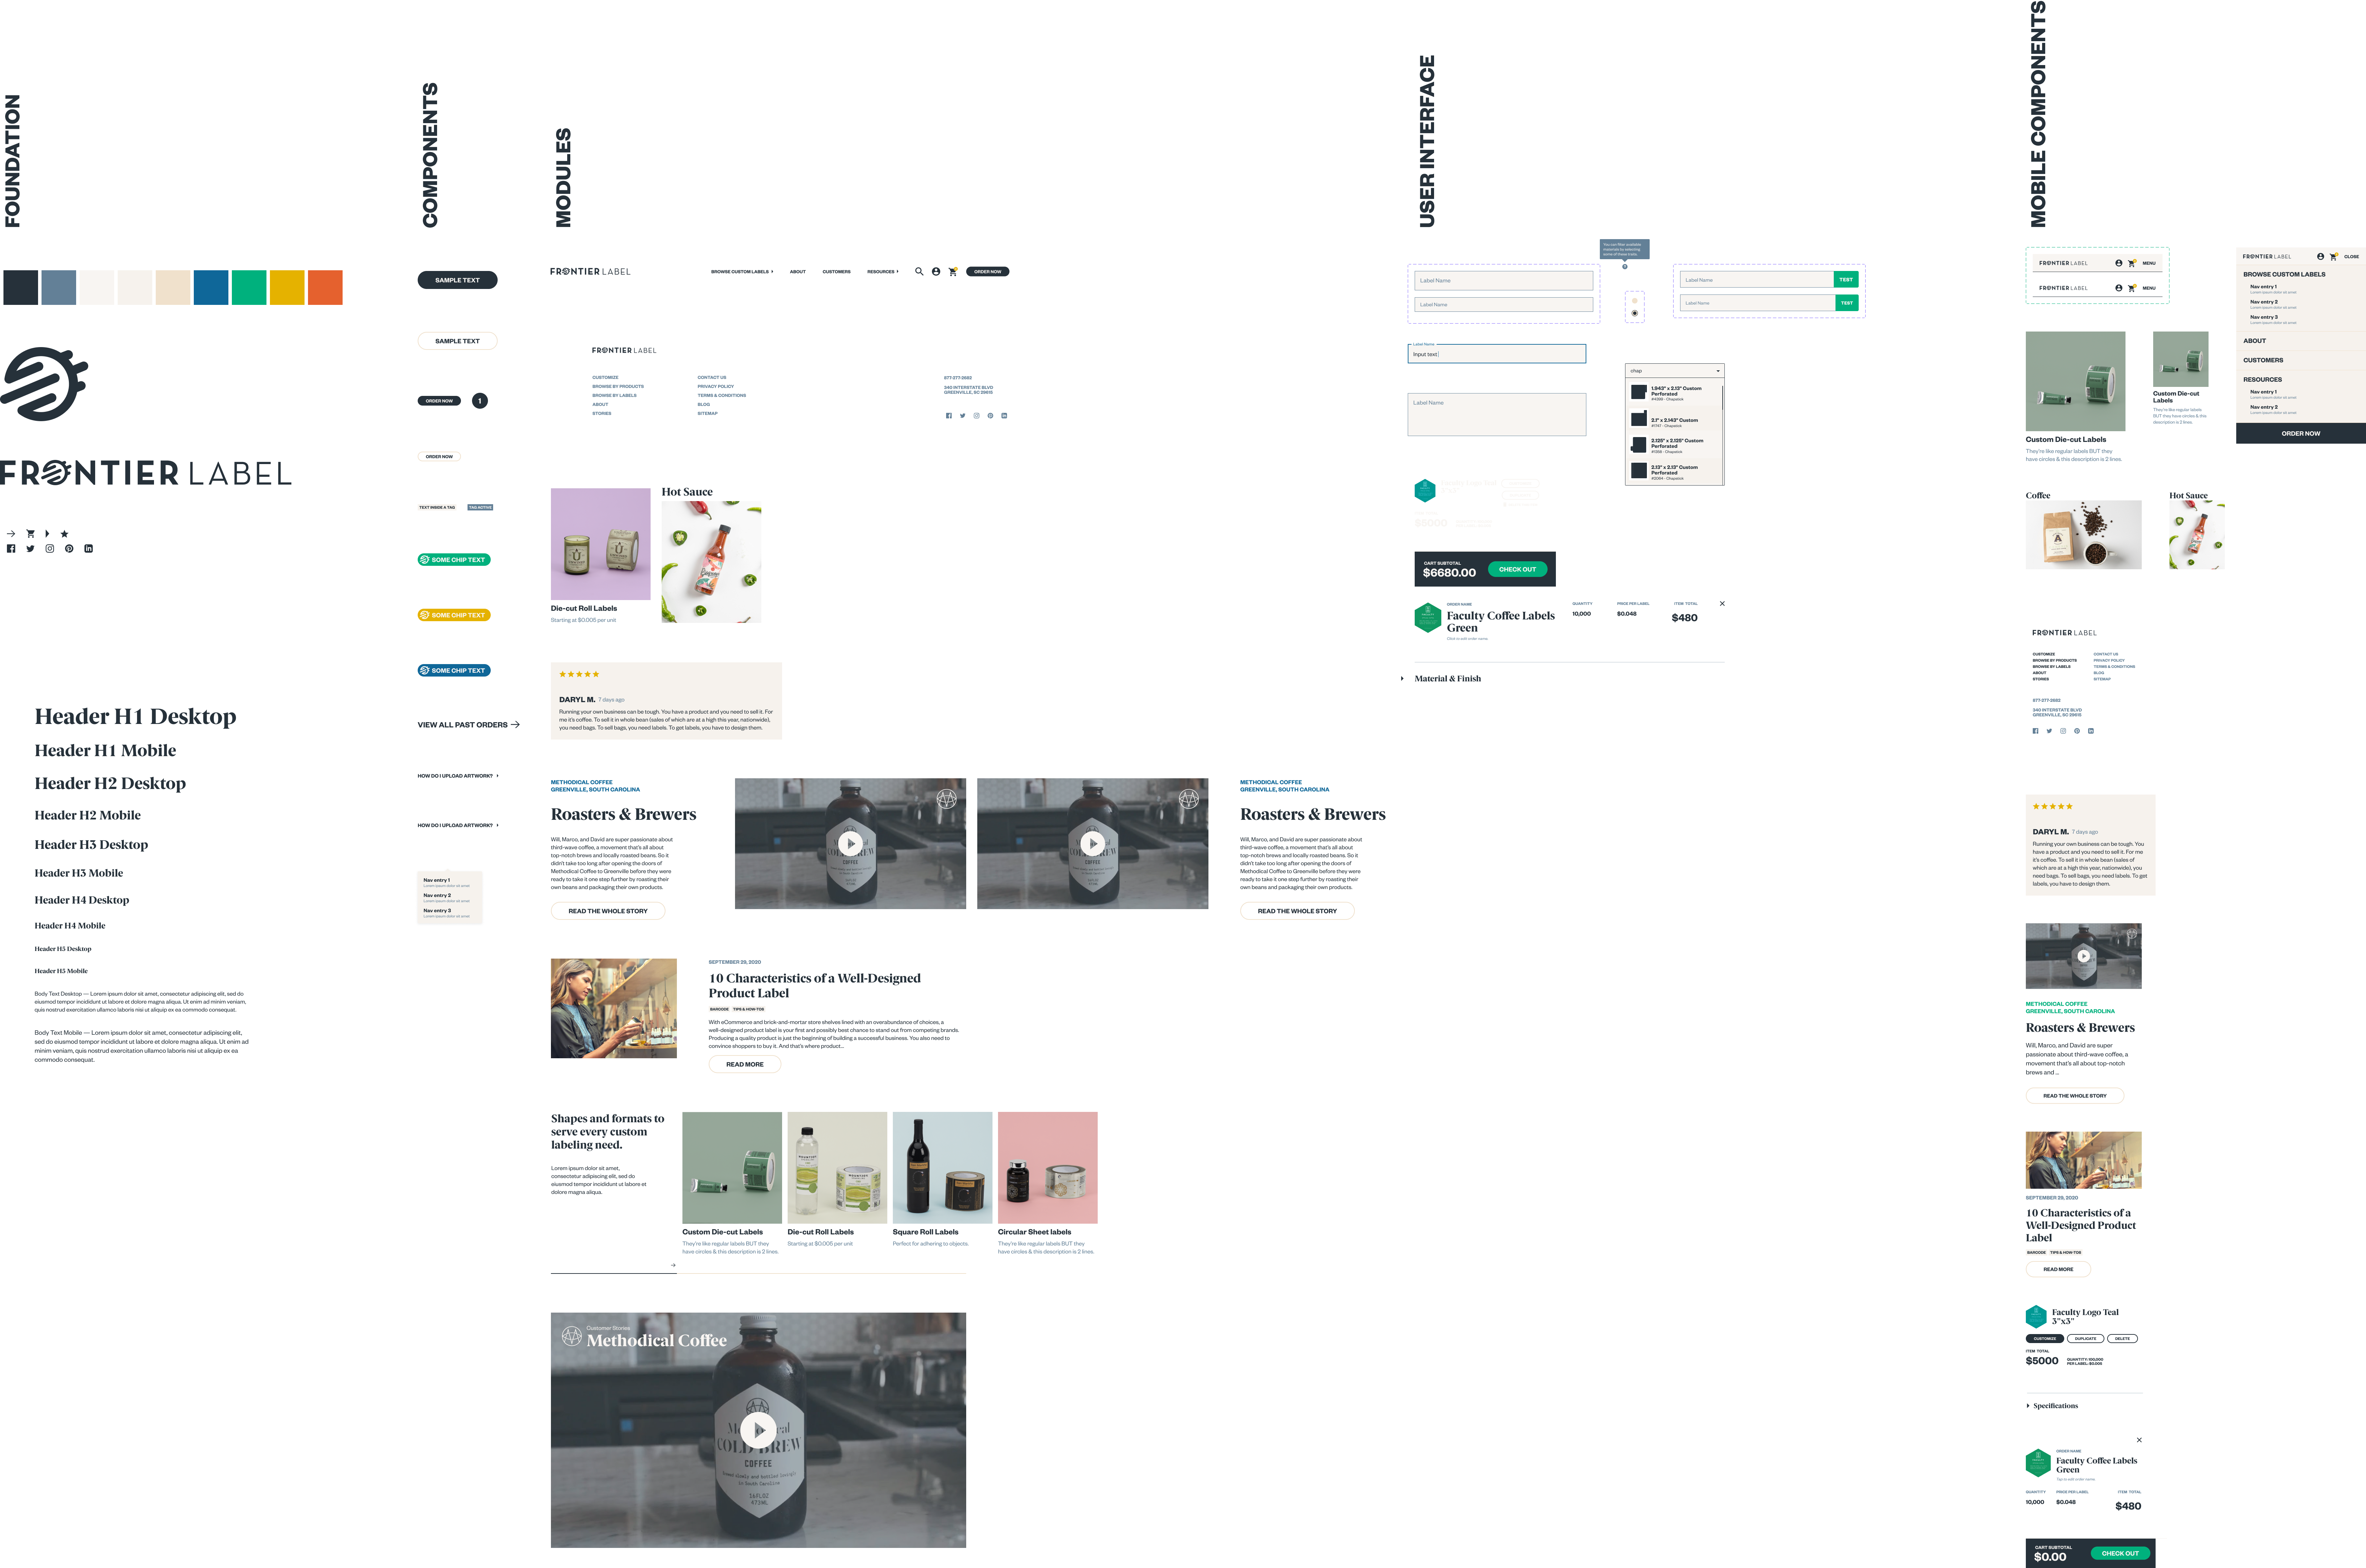 A high-level screenshot of the design system and component library I created for Frontier Label's digital needs.